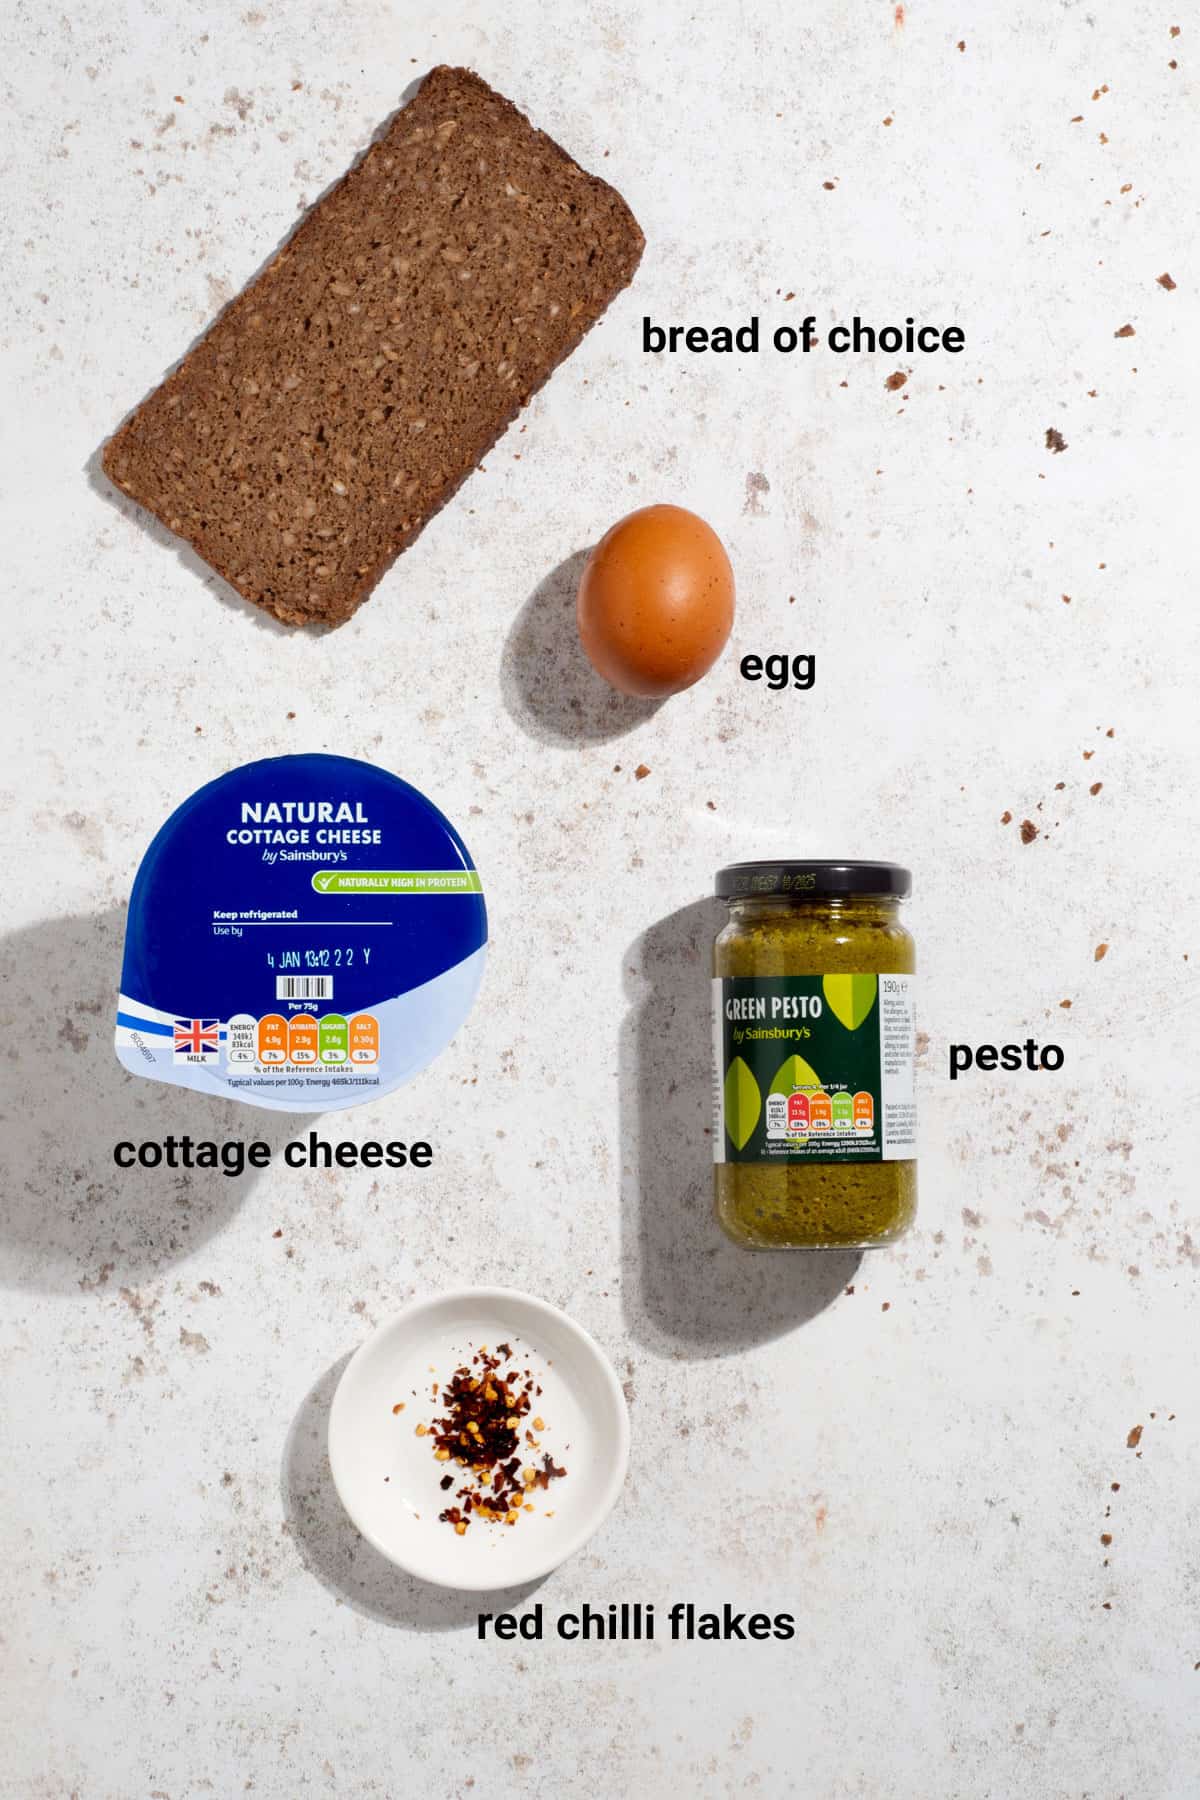 Fried egg and pesto toast ingredients.